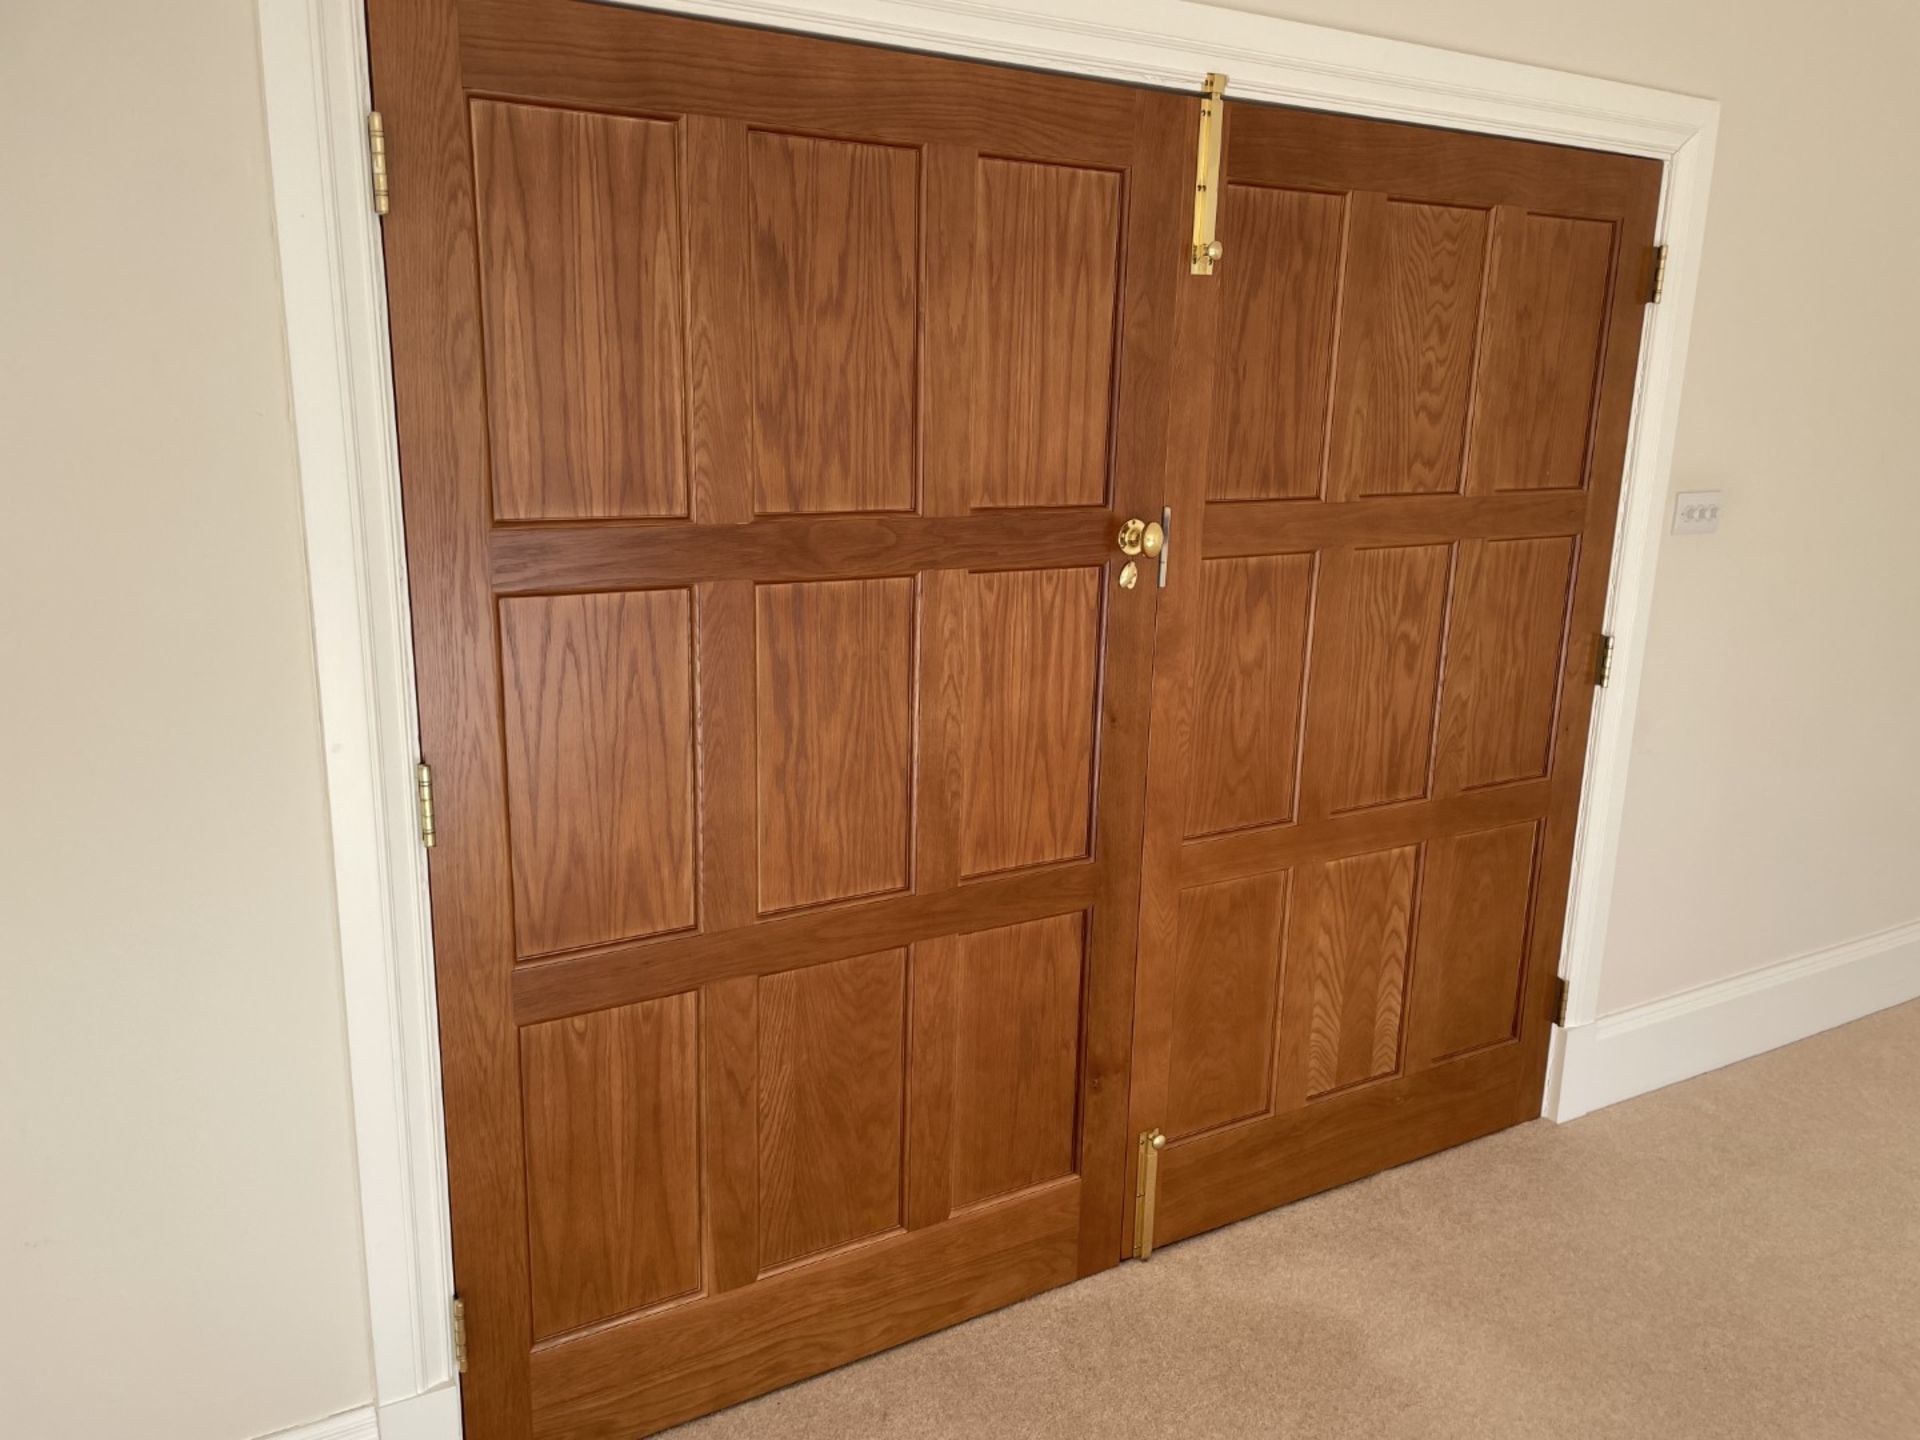 1 x Set of Stately Solid Wood Double Doors - Image 18 of 21